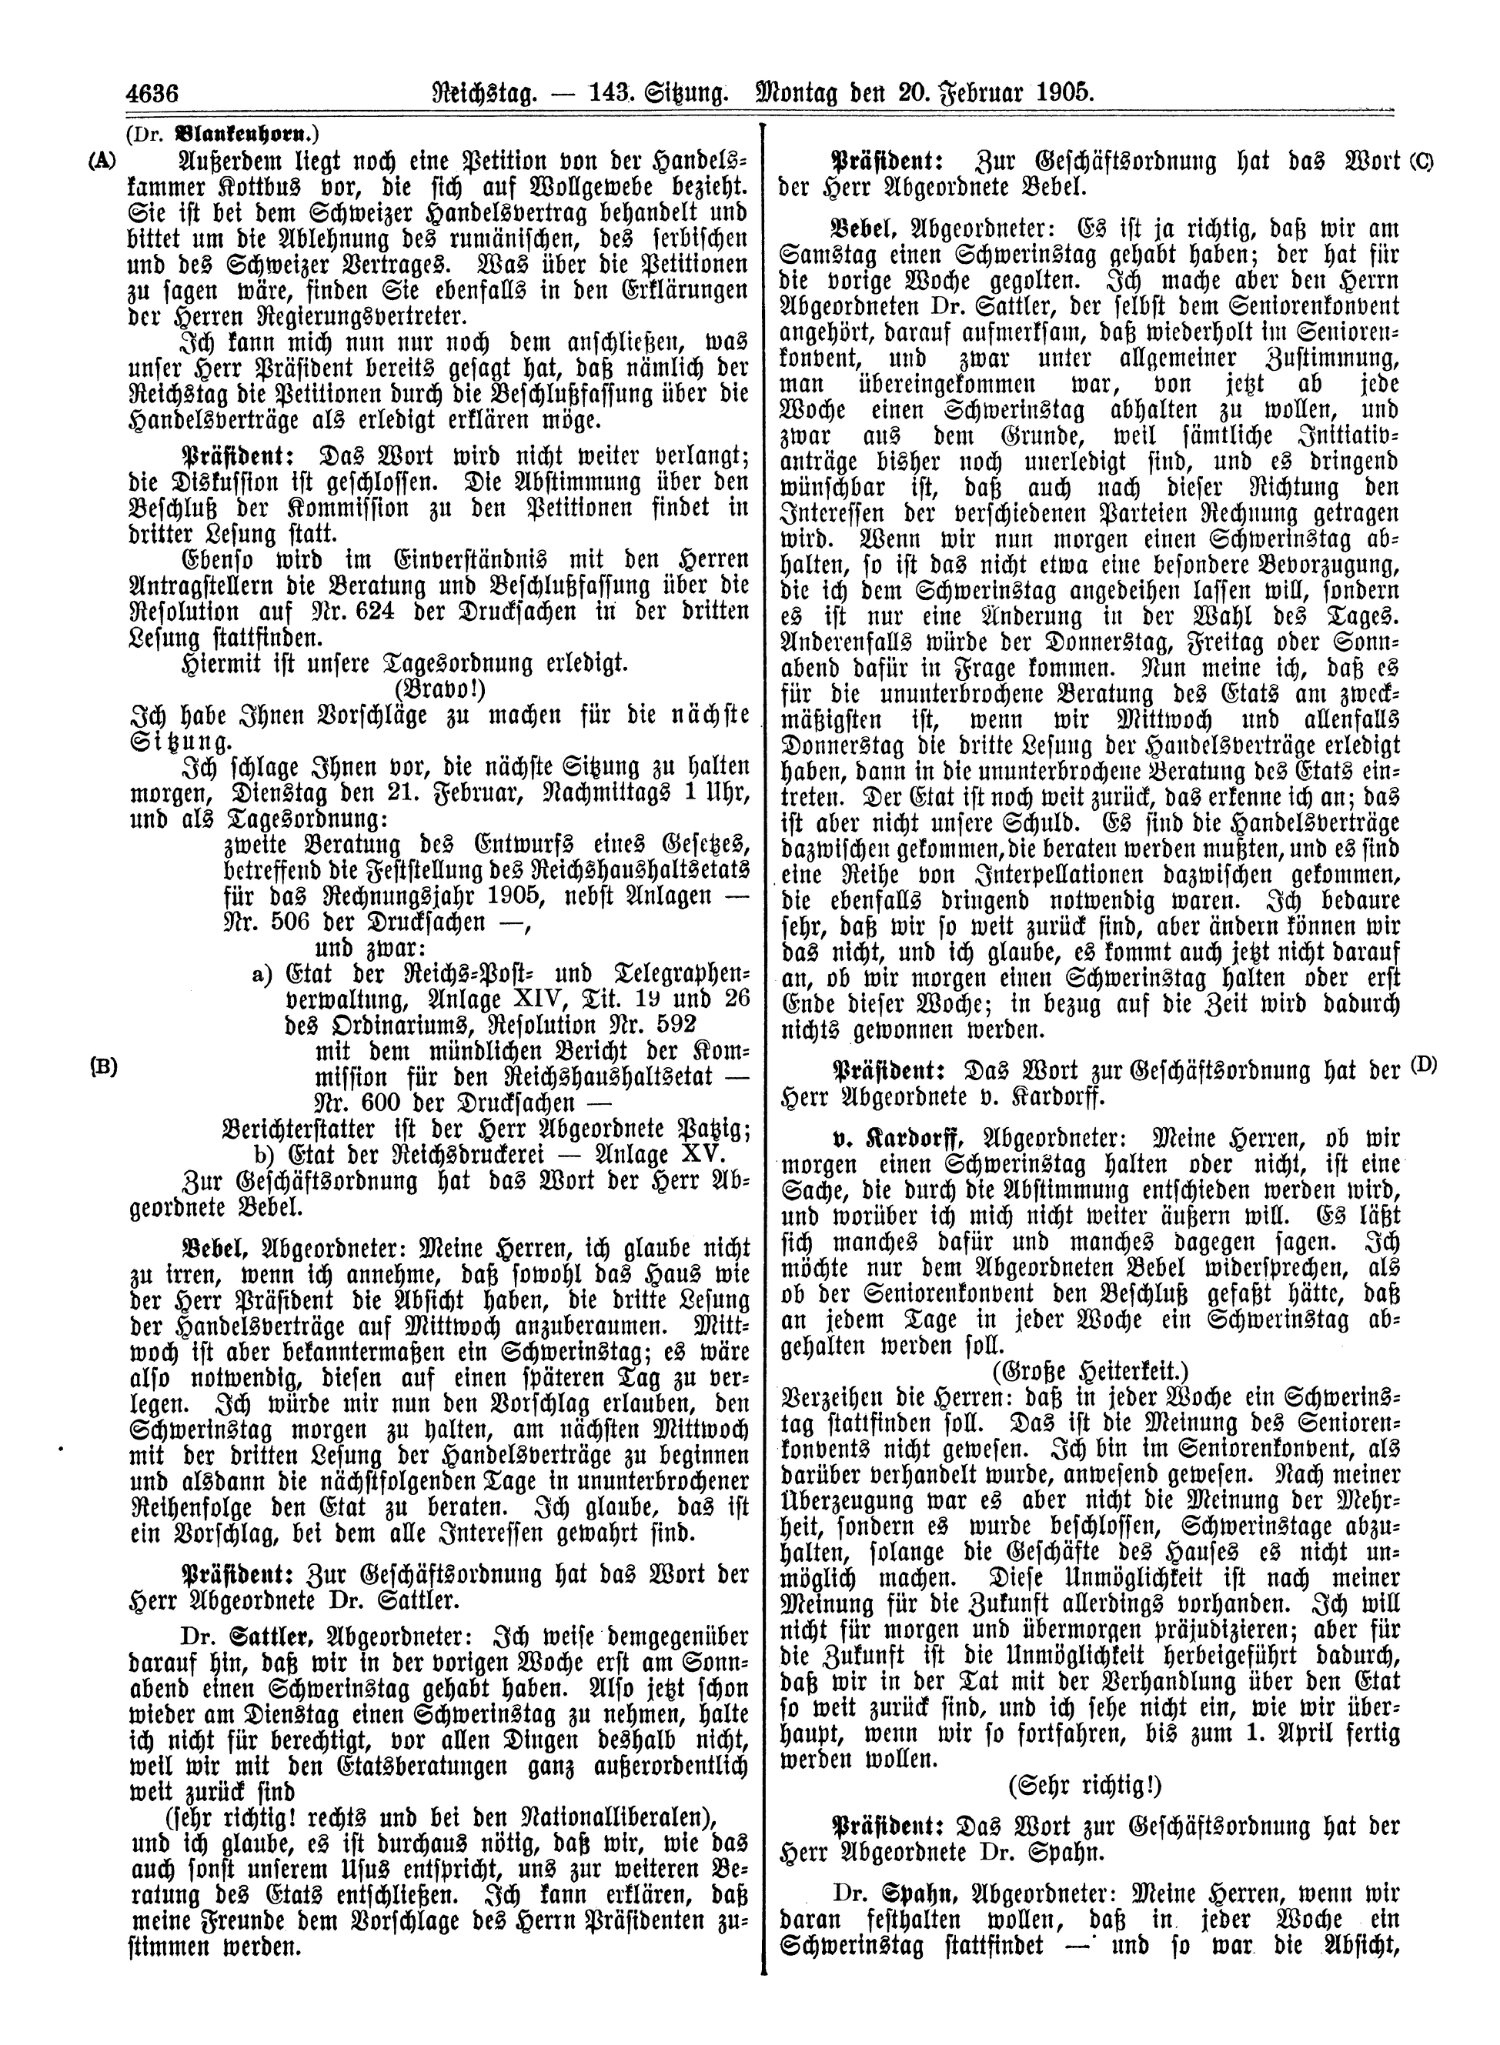 Scan of page 4636